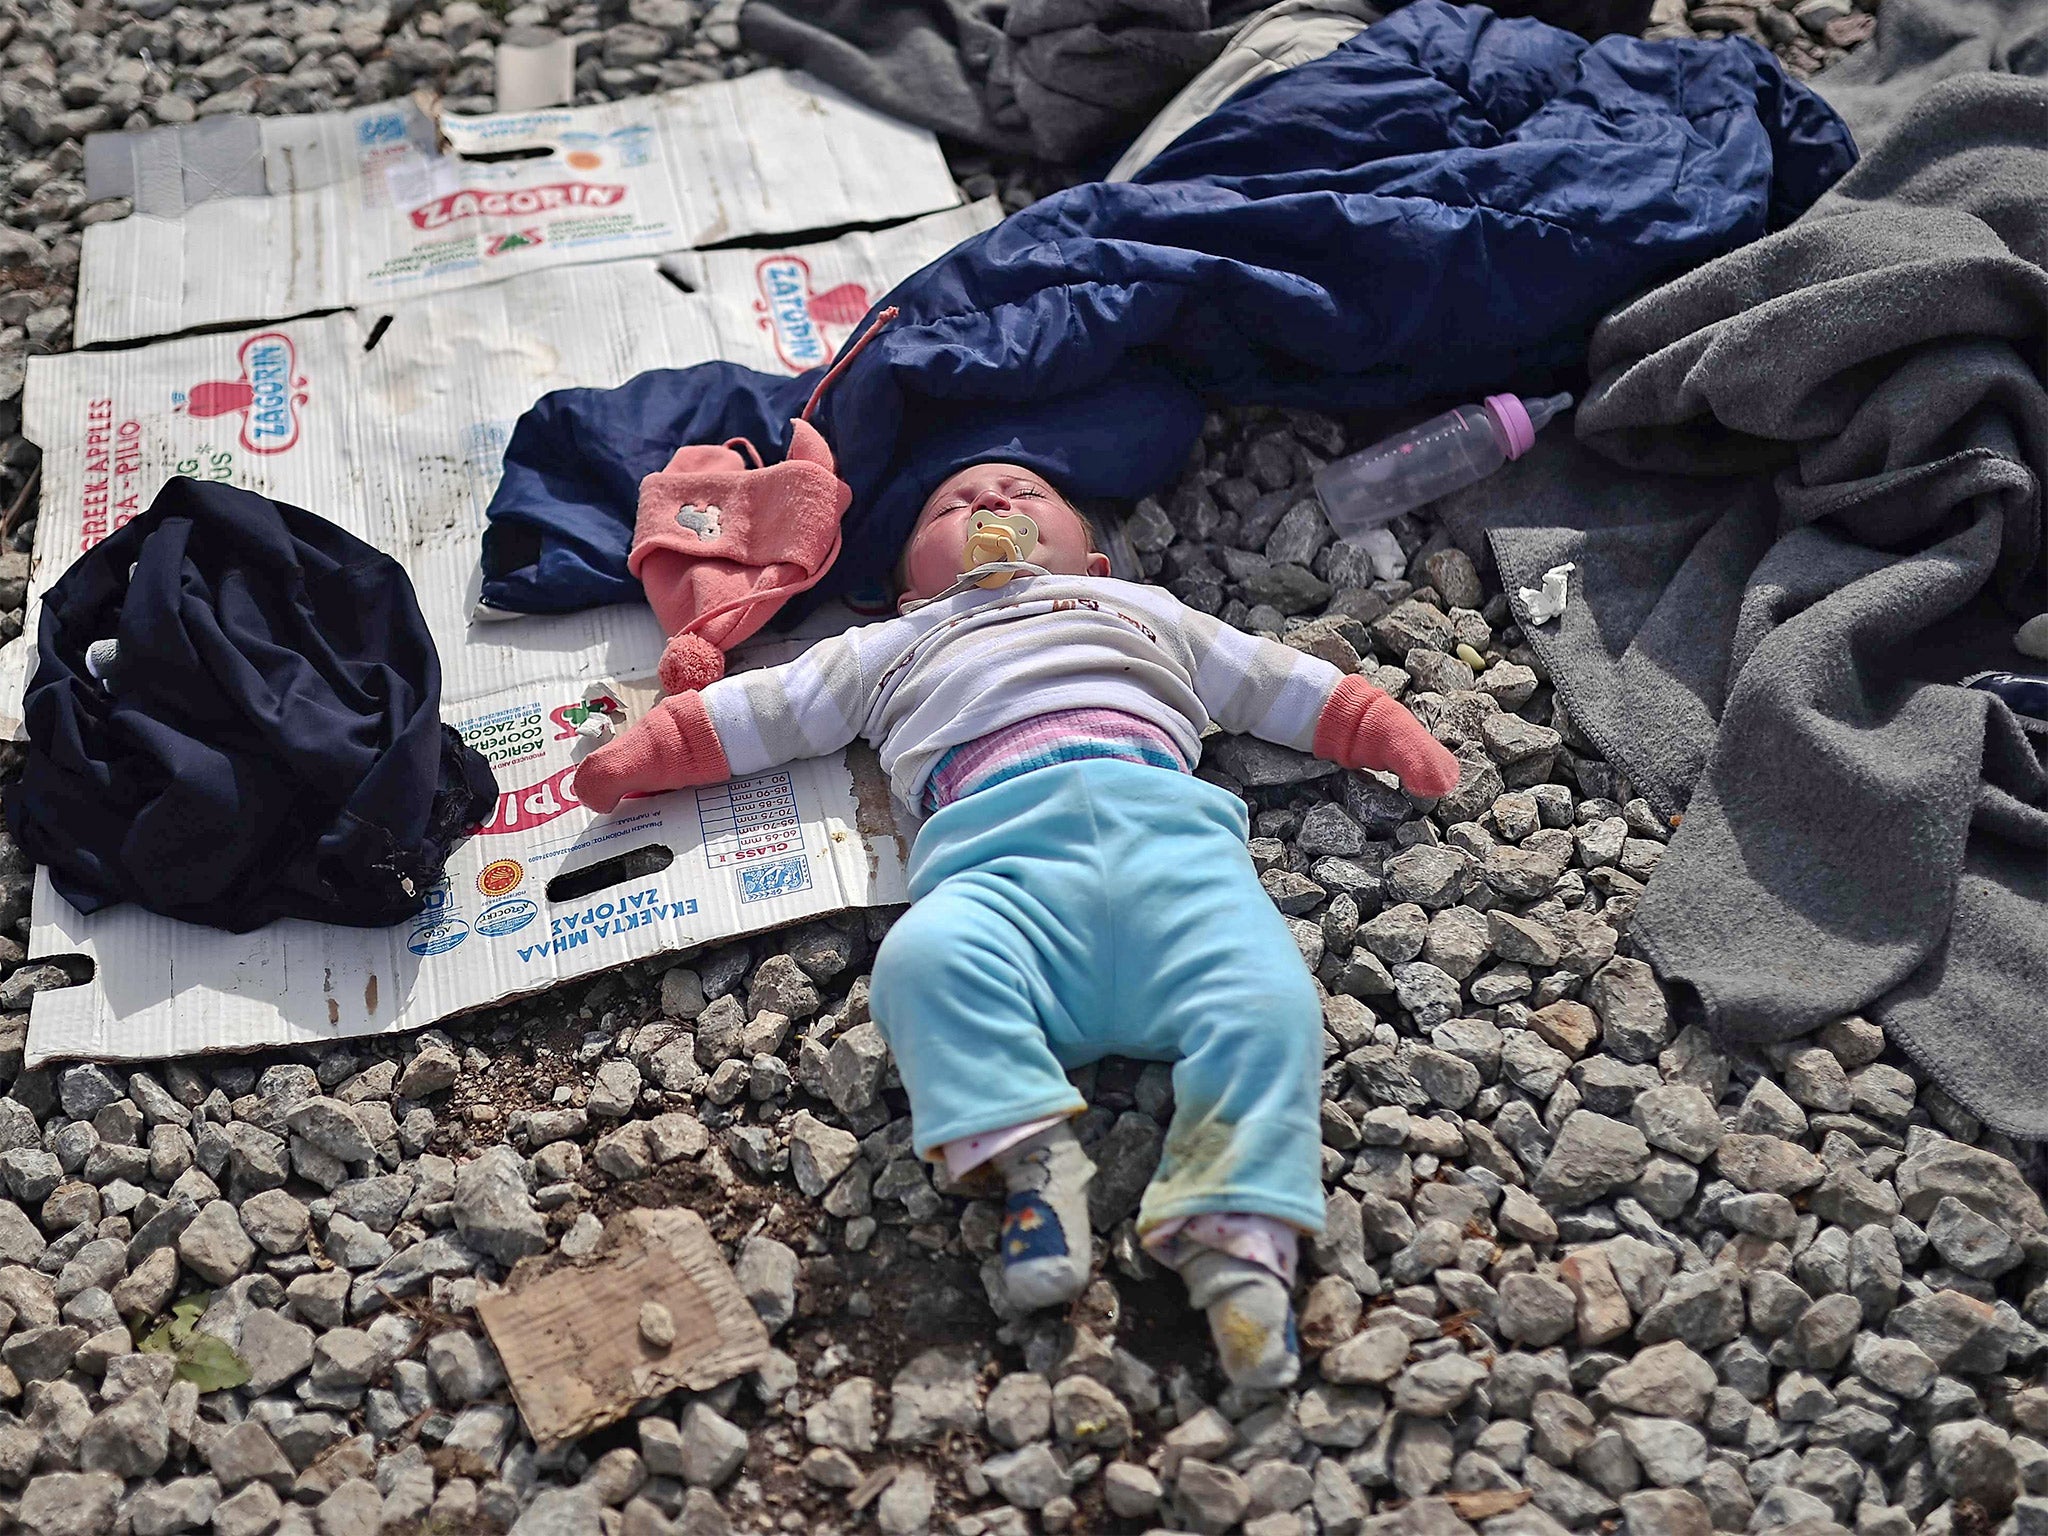 A baby sleeps near railway tracks at the makeshift camp near the village of Idomeni on the Greek-Macedonian border, where thousands of refugees and migrants are stranded (Getty)